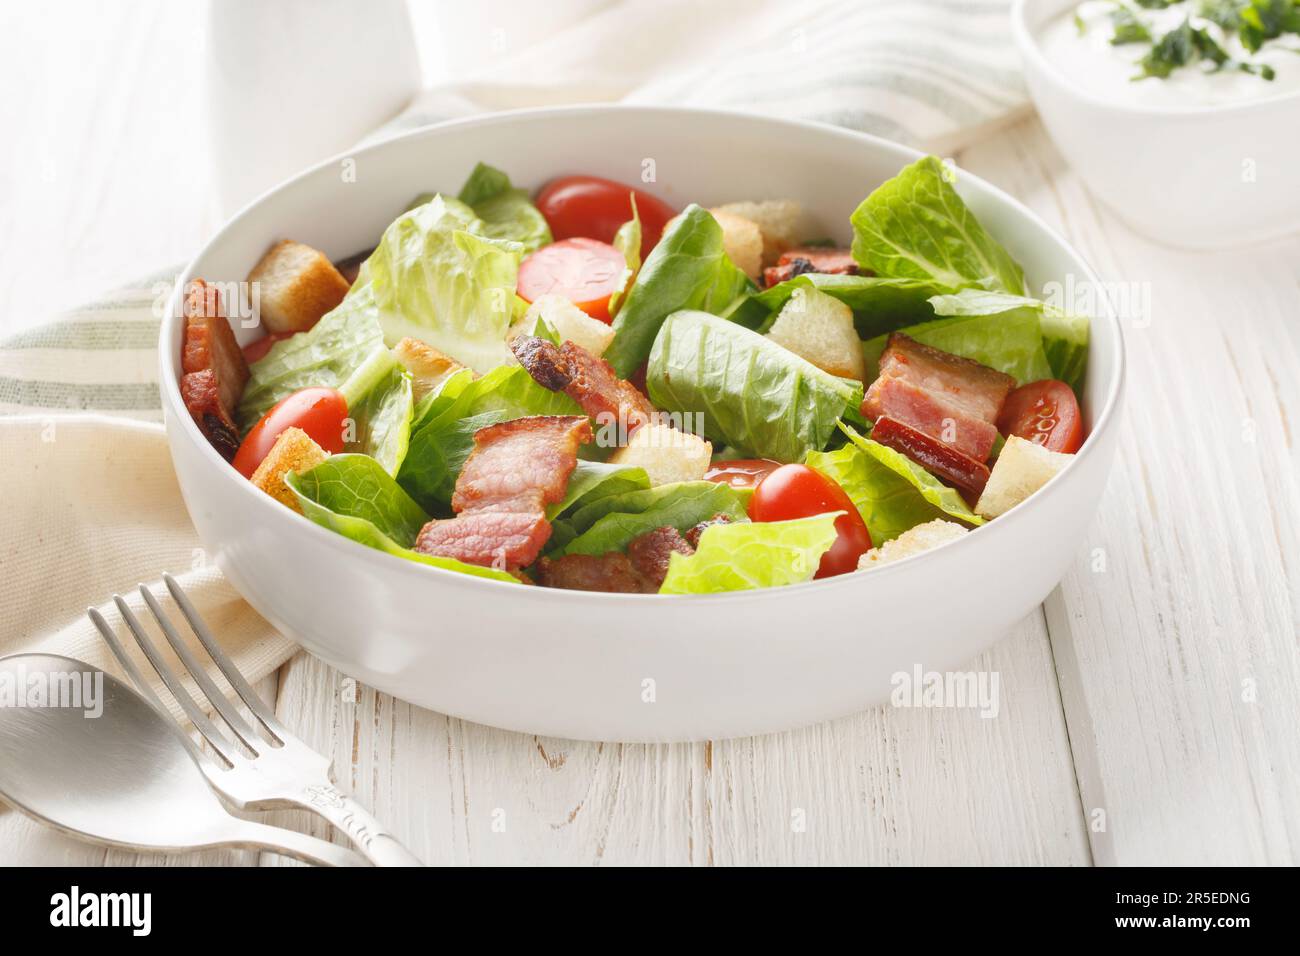 Healthy Organic BLT Bacon Salad with Lettuce and Tomato closeup on the plate on the table. Horizontal Stock Photo